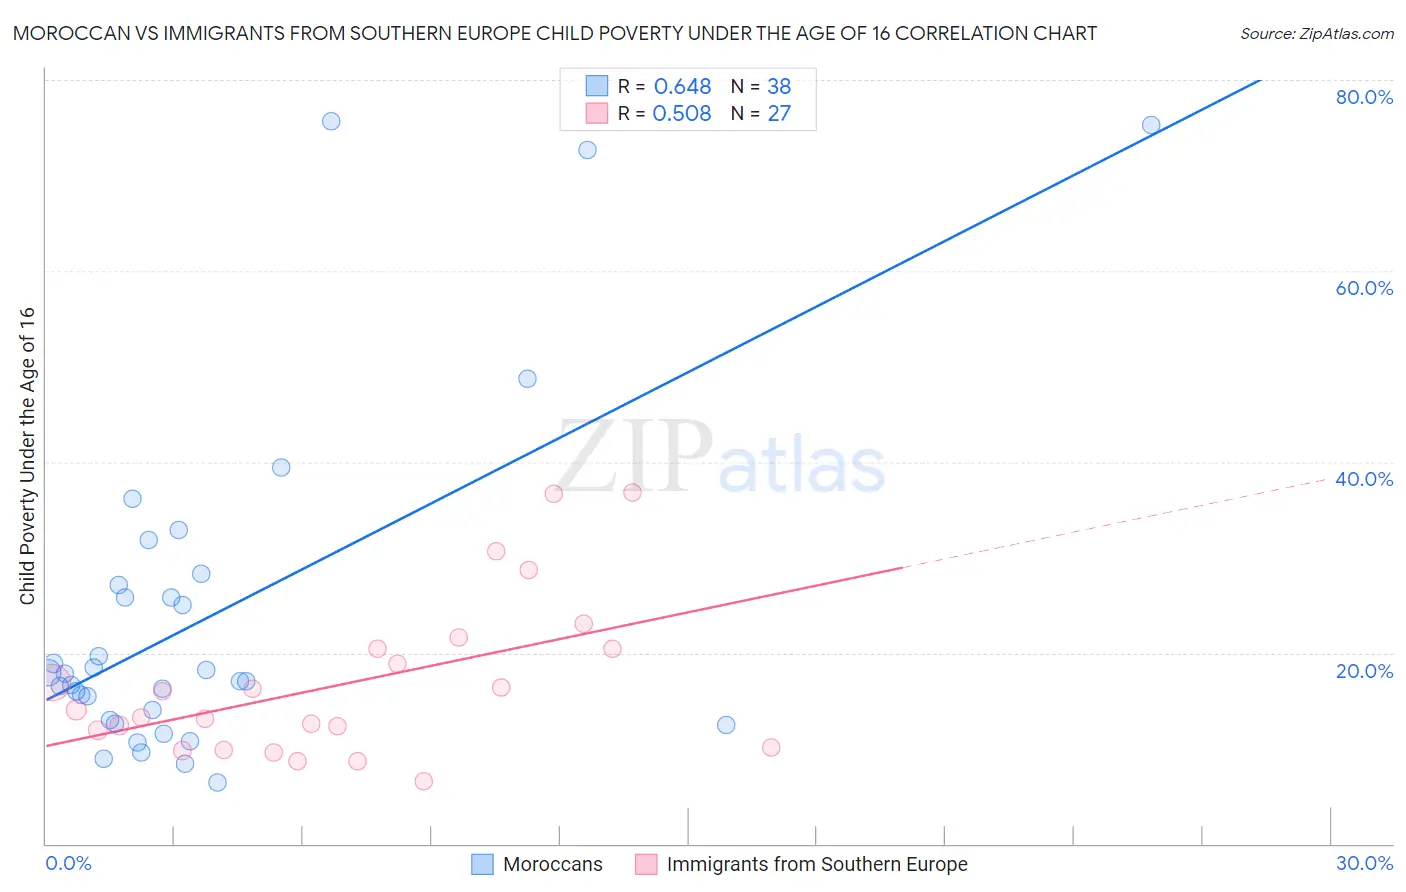 Moroccan vs Immigrants from Southern Europe Child Poverty Under the Age of 16